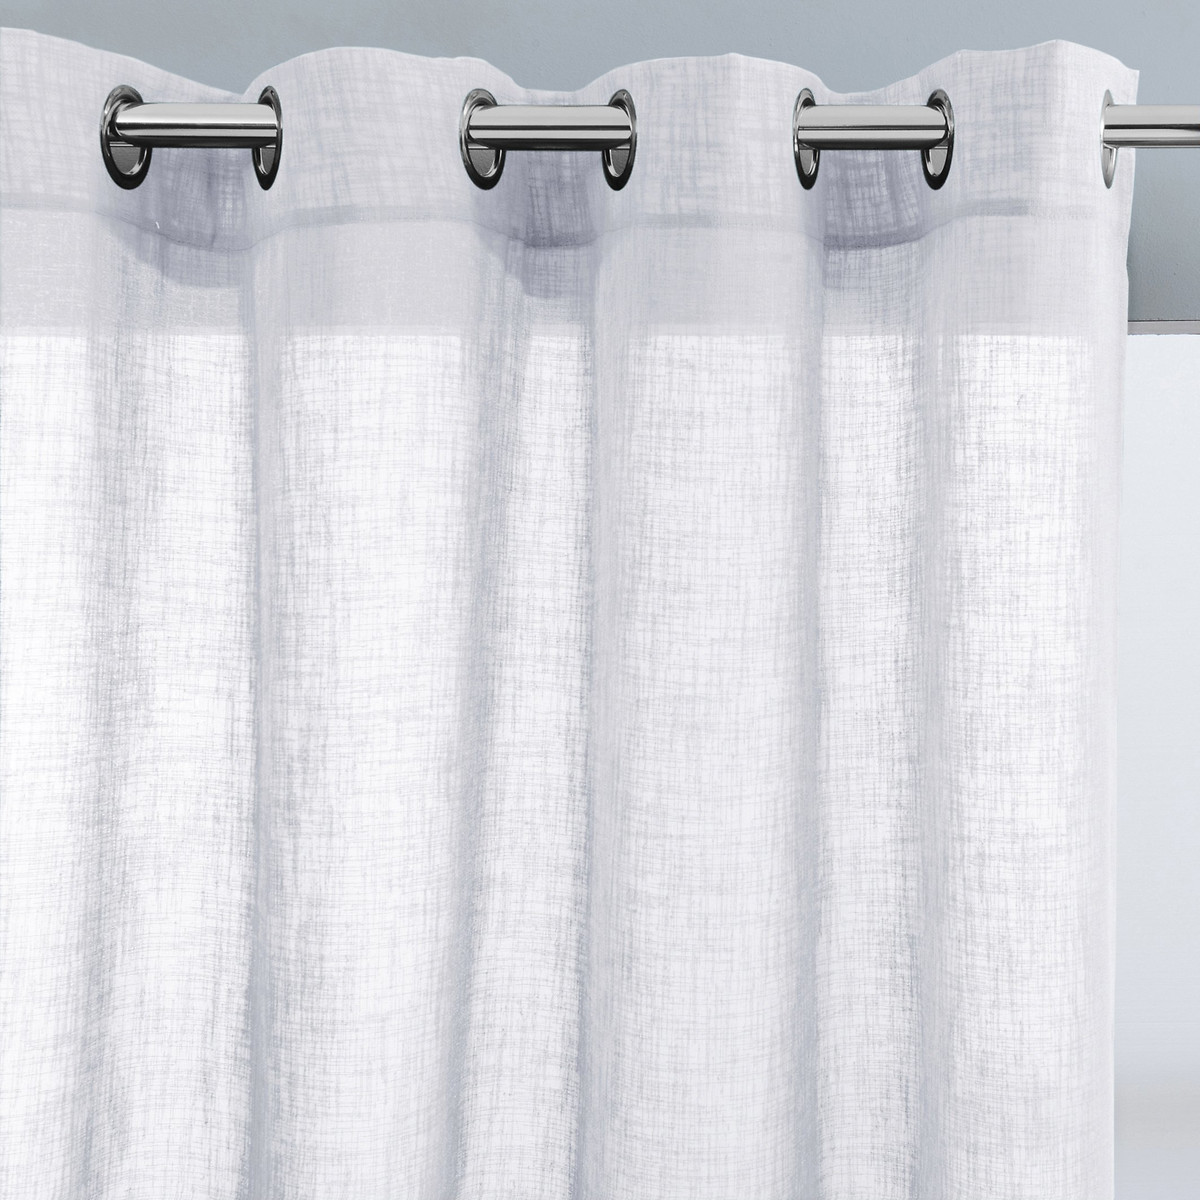 Nyong Linen Effect Single Voile Panel, Voile White Curtains Eyelet